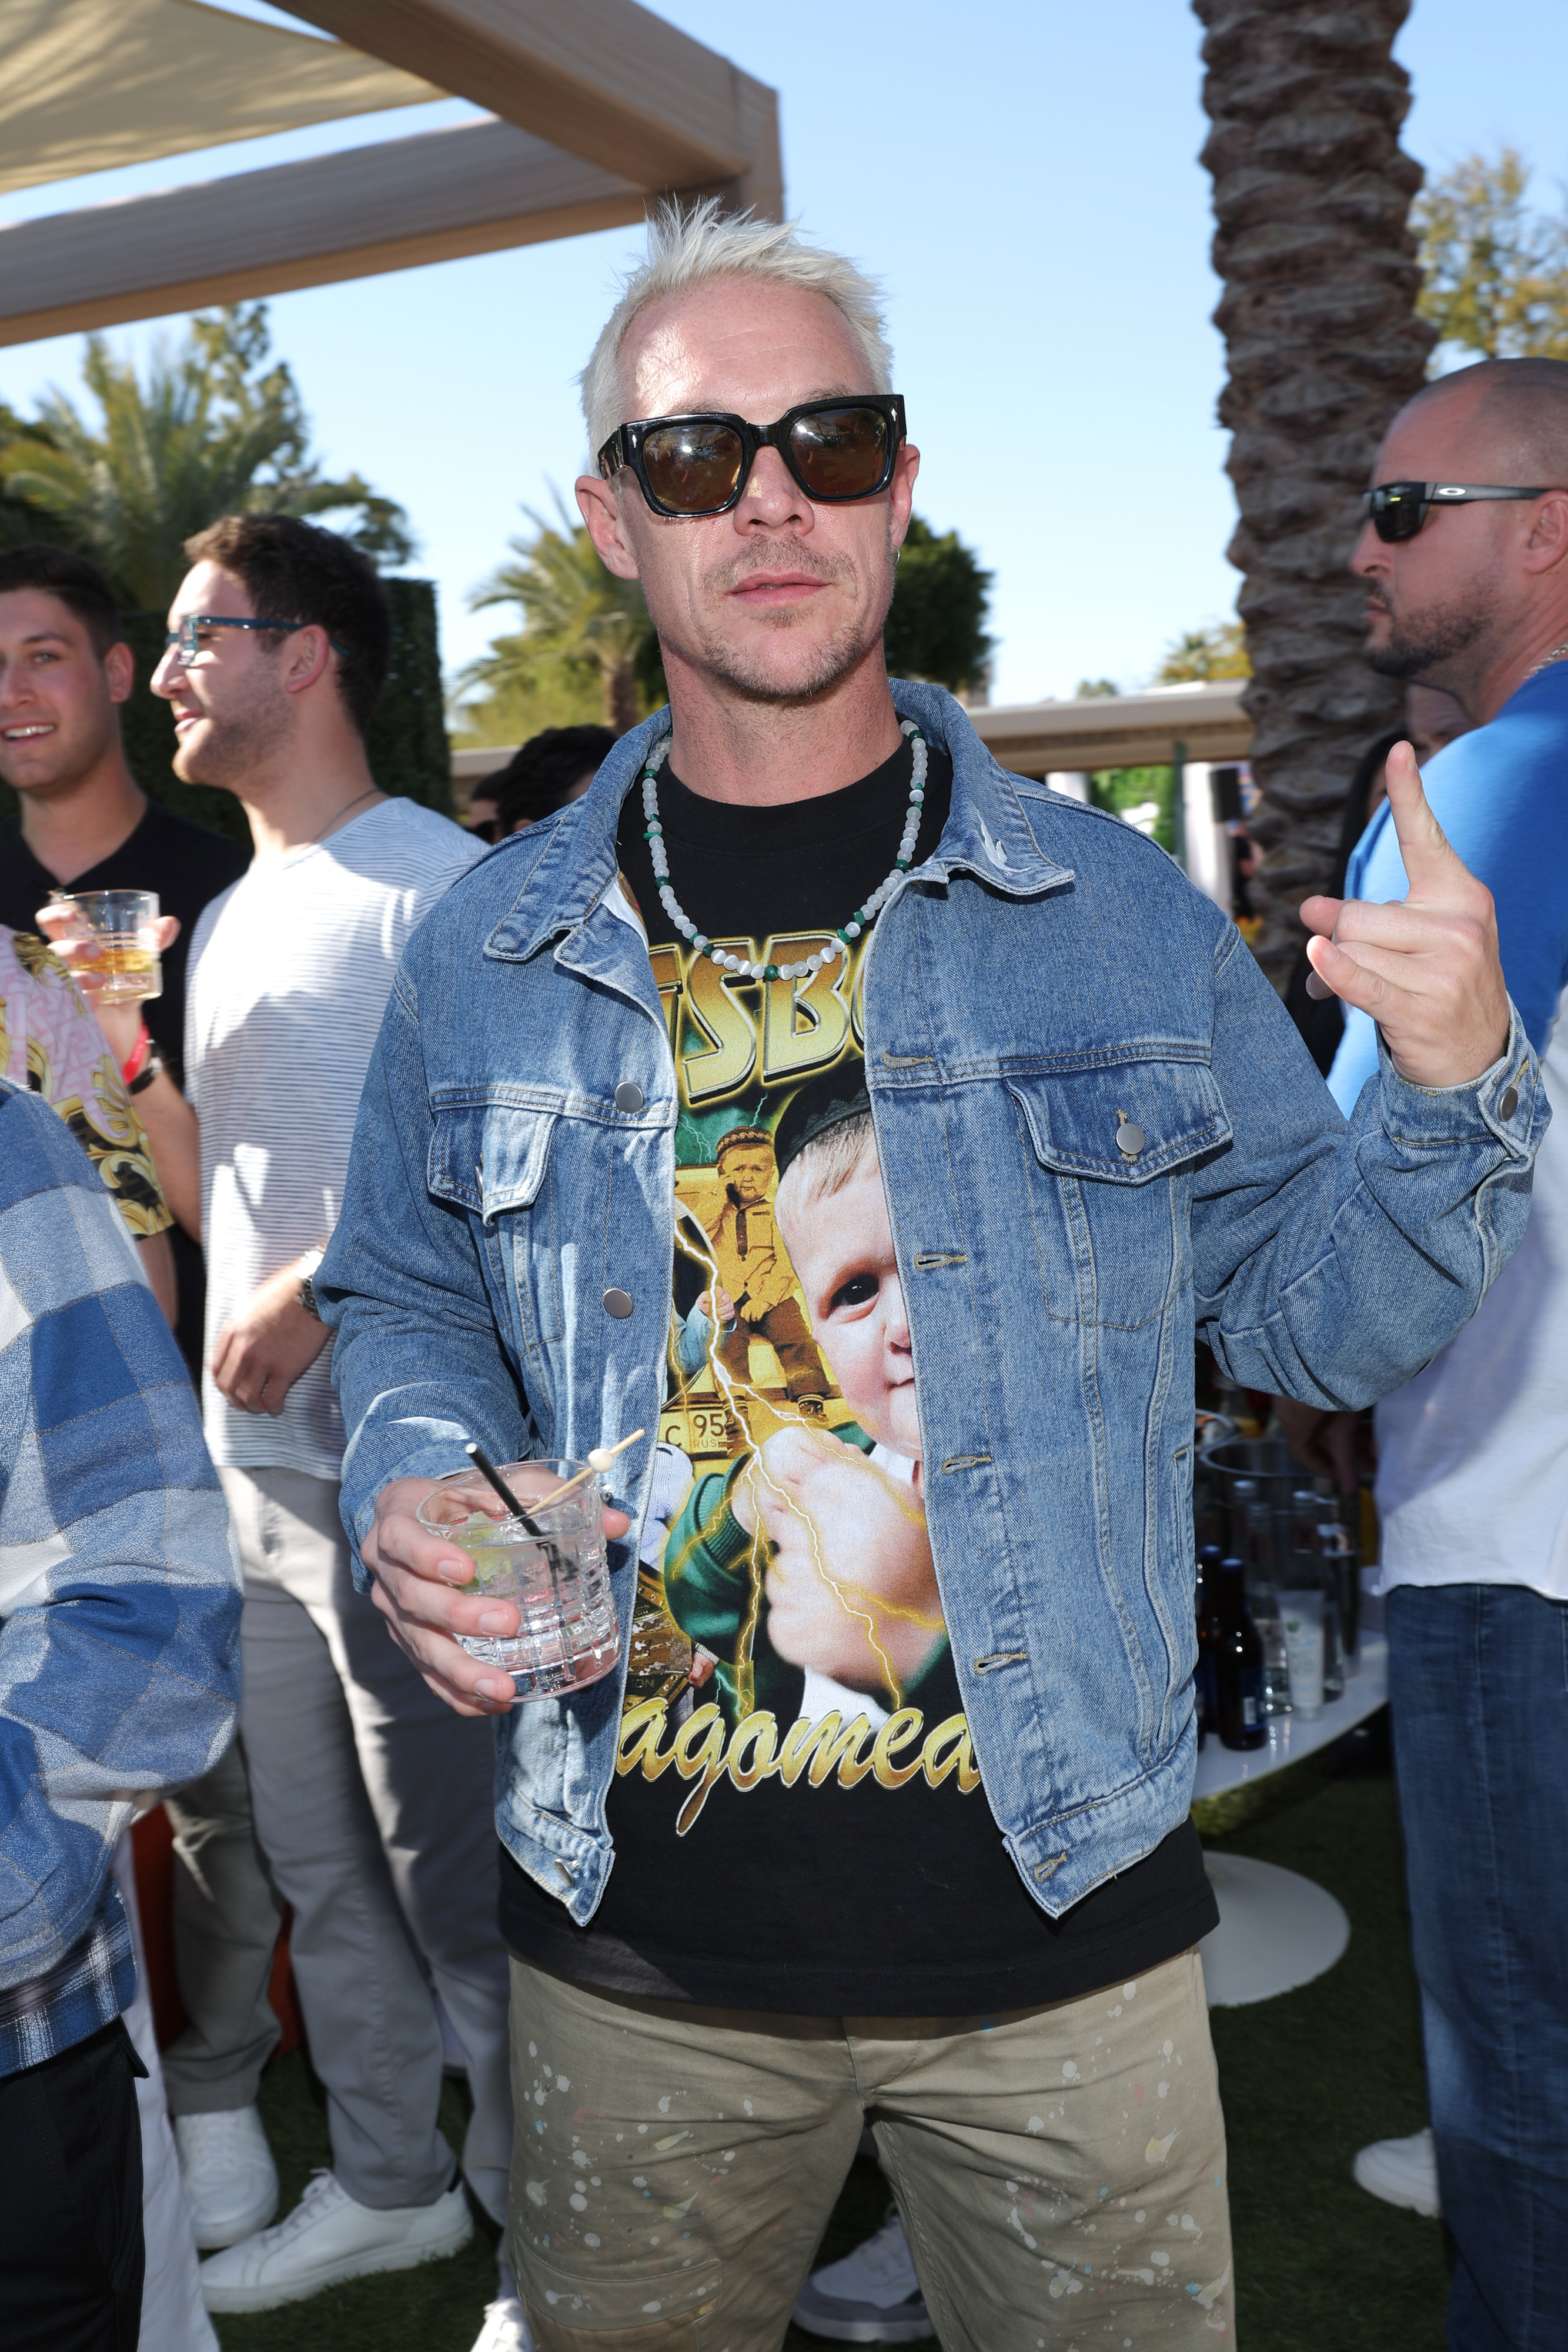 Diplo at an outdoor event holding a drink